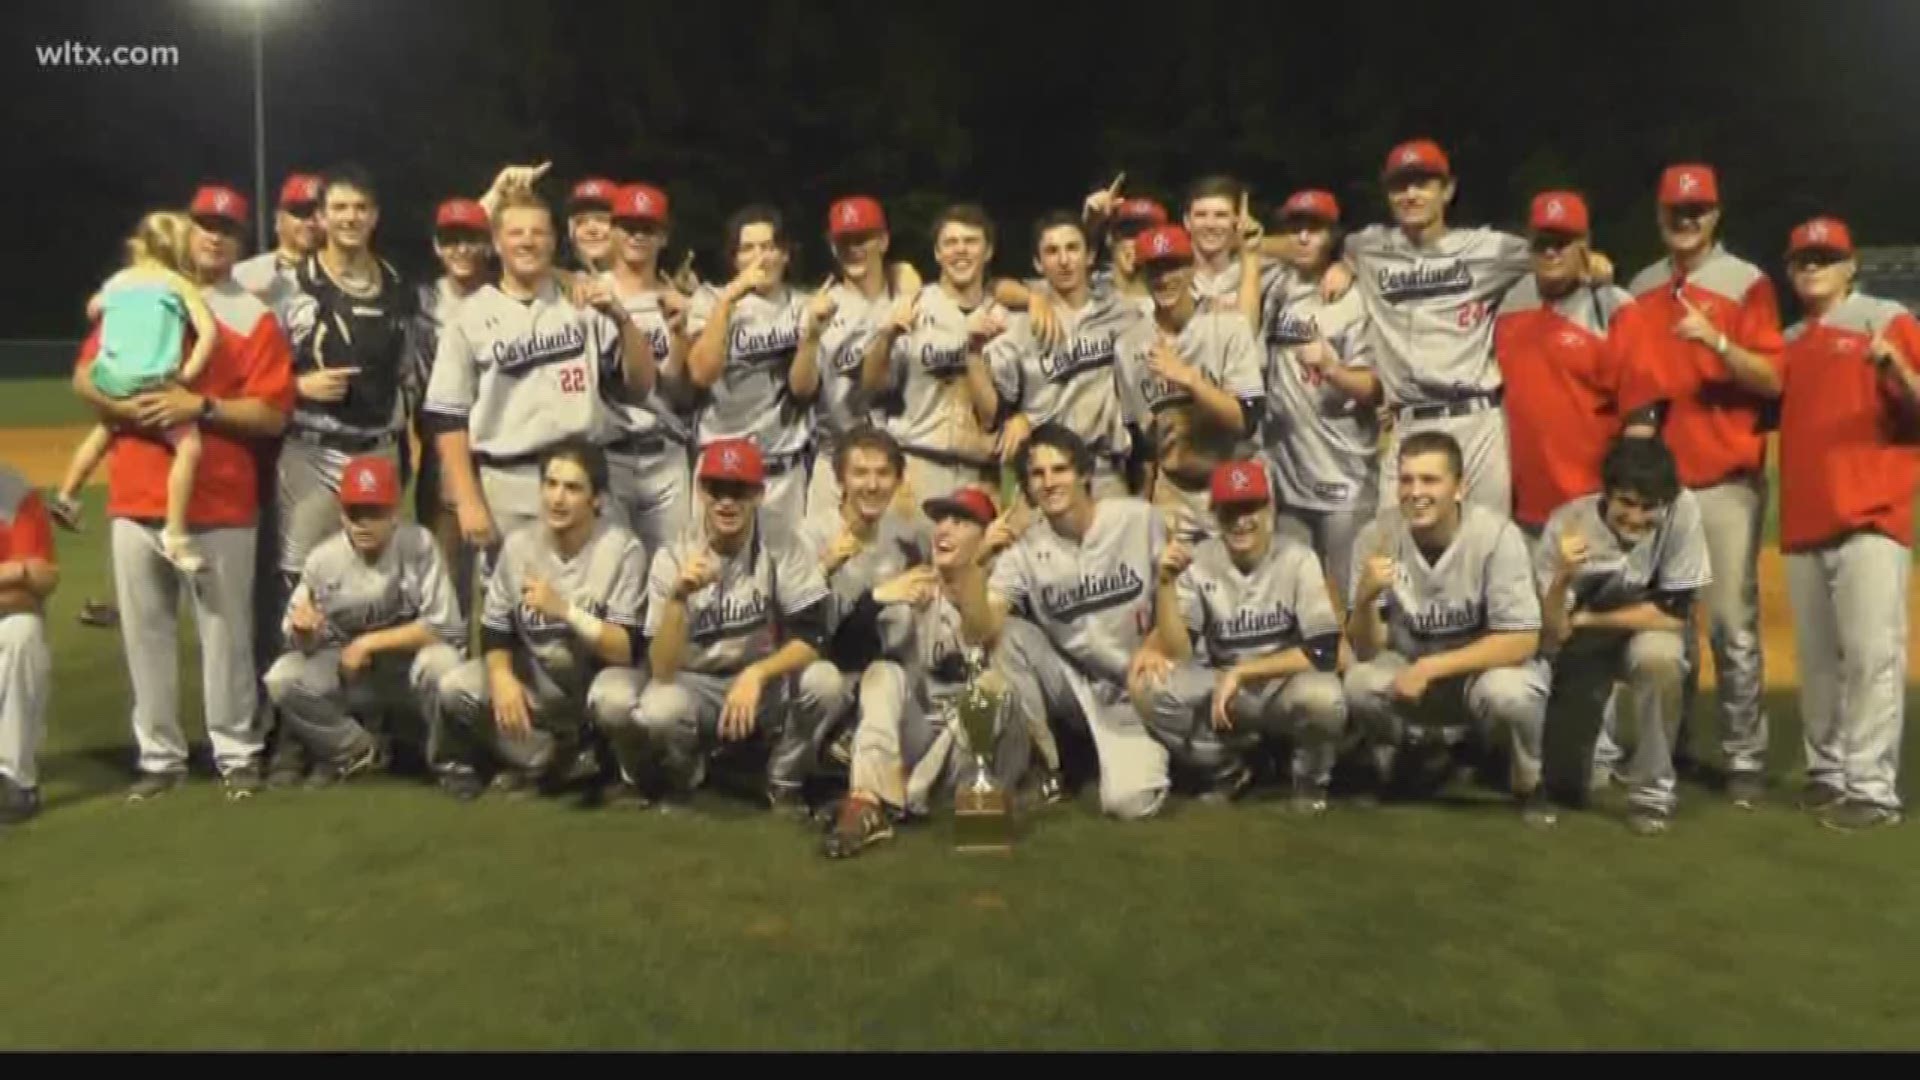 Cardinal Newman wins the SCISA 3A state baseball championship with an 8-2 win over Ben Lippen. The Cardinals win the series 2-0.